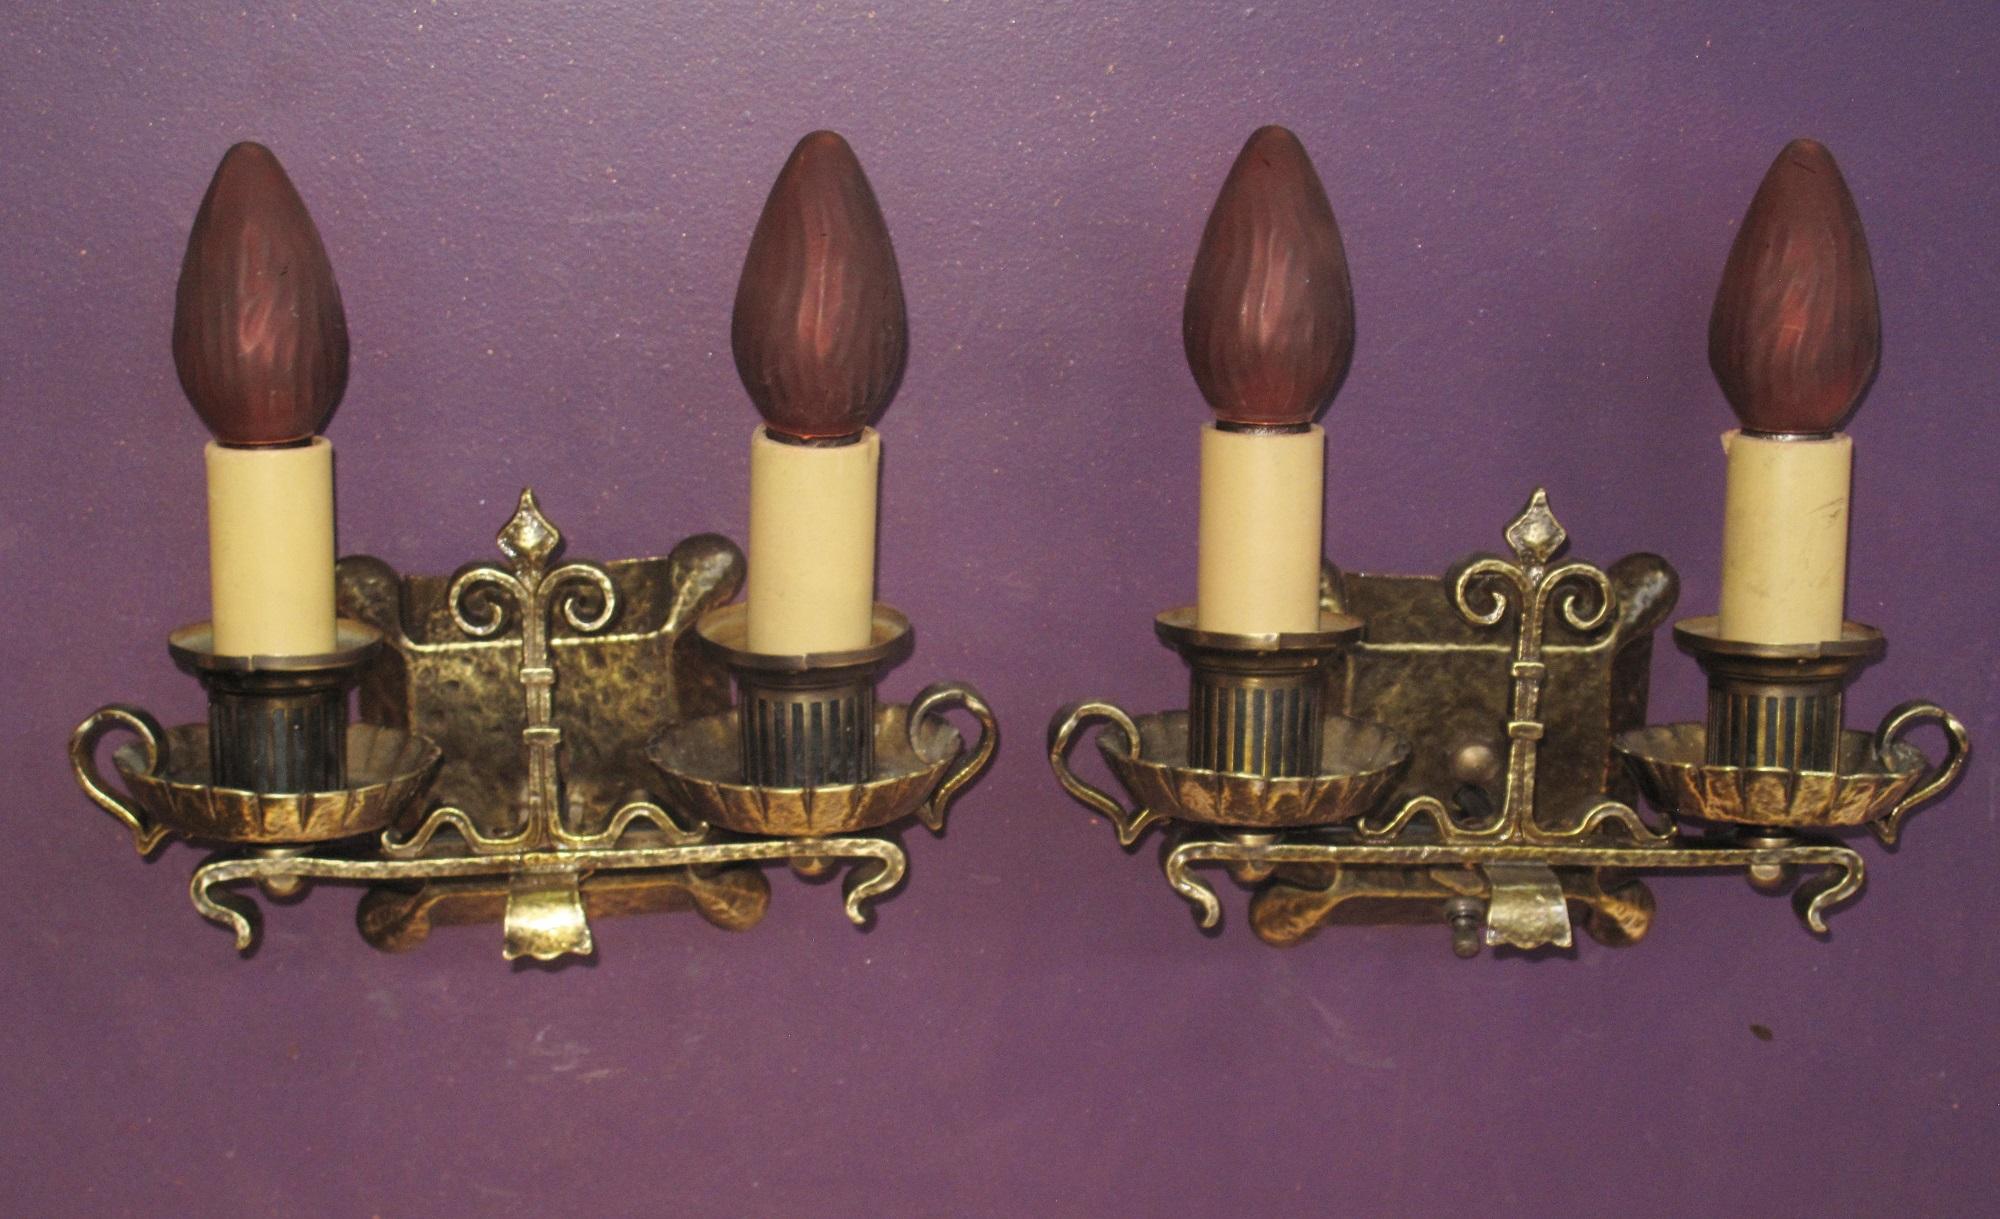 Wonderful sconces designed to fit into several of the decorating styles of their time, Tudor, Spanish Revival, Craftsman, Storybook, and/or Gothic. There is a lot going on with these sconces which one would not notice at first glance. The keen